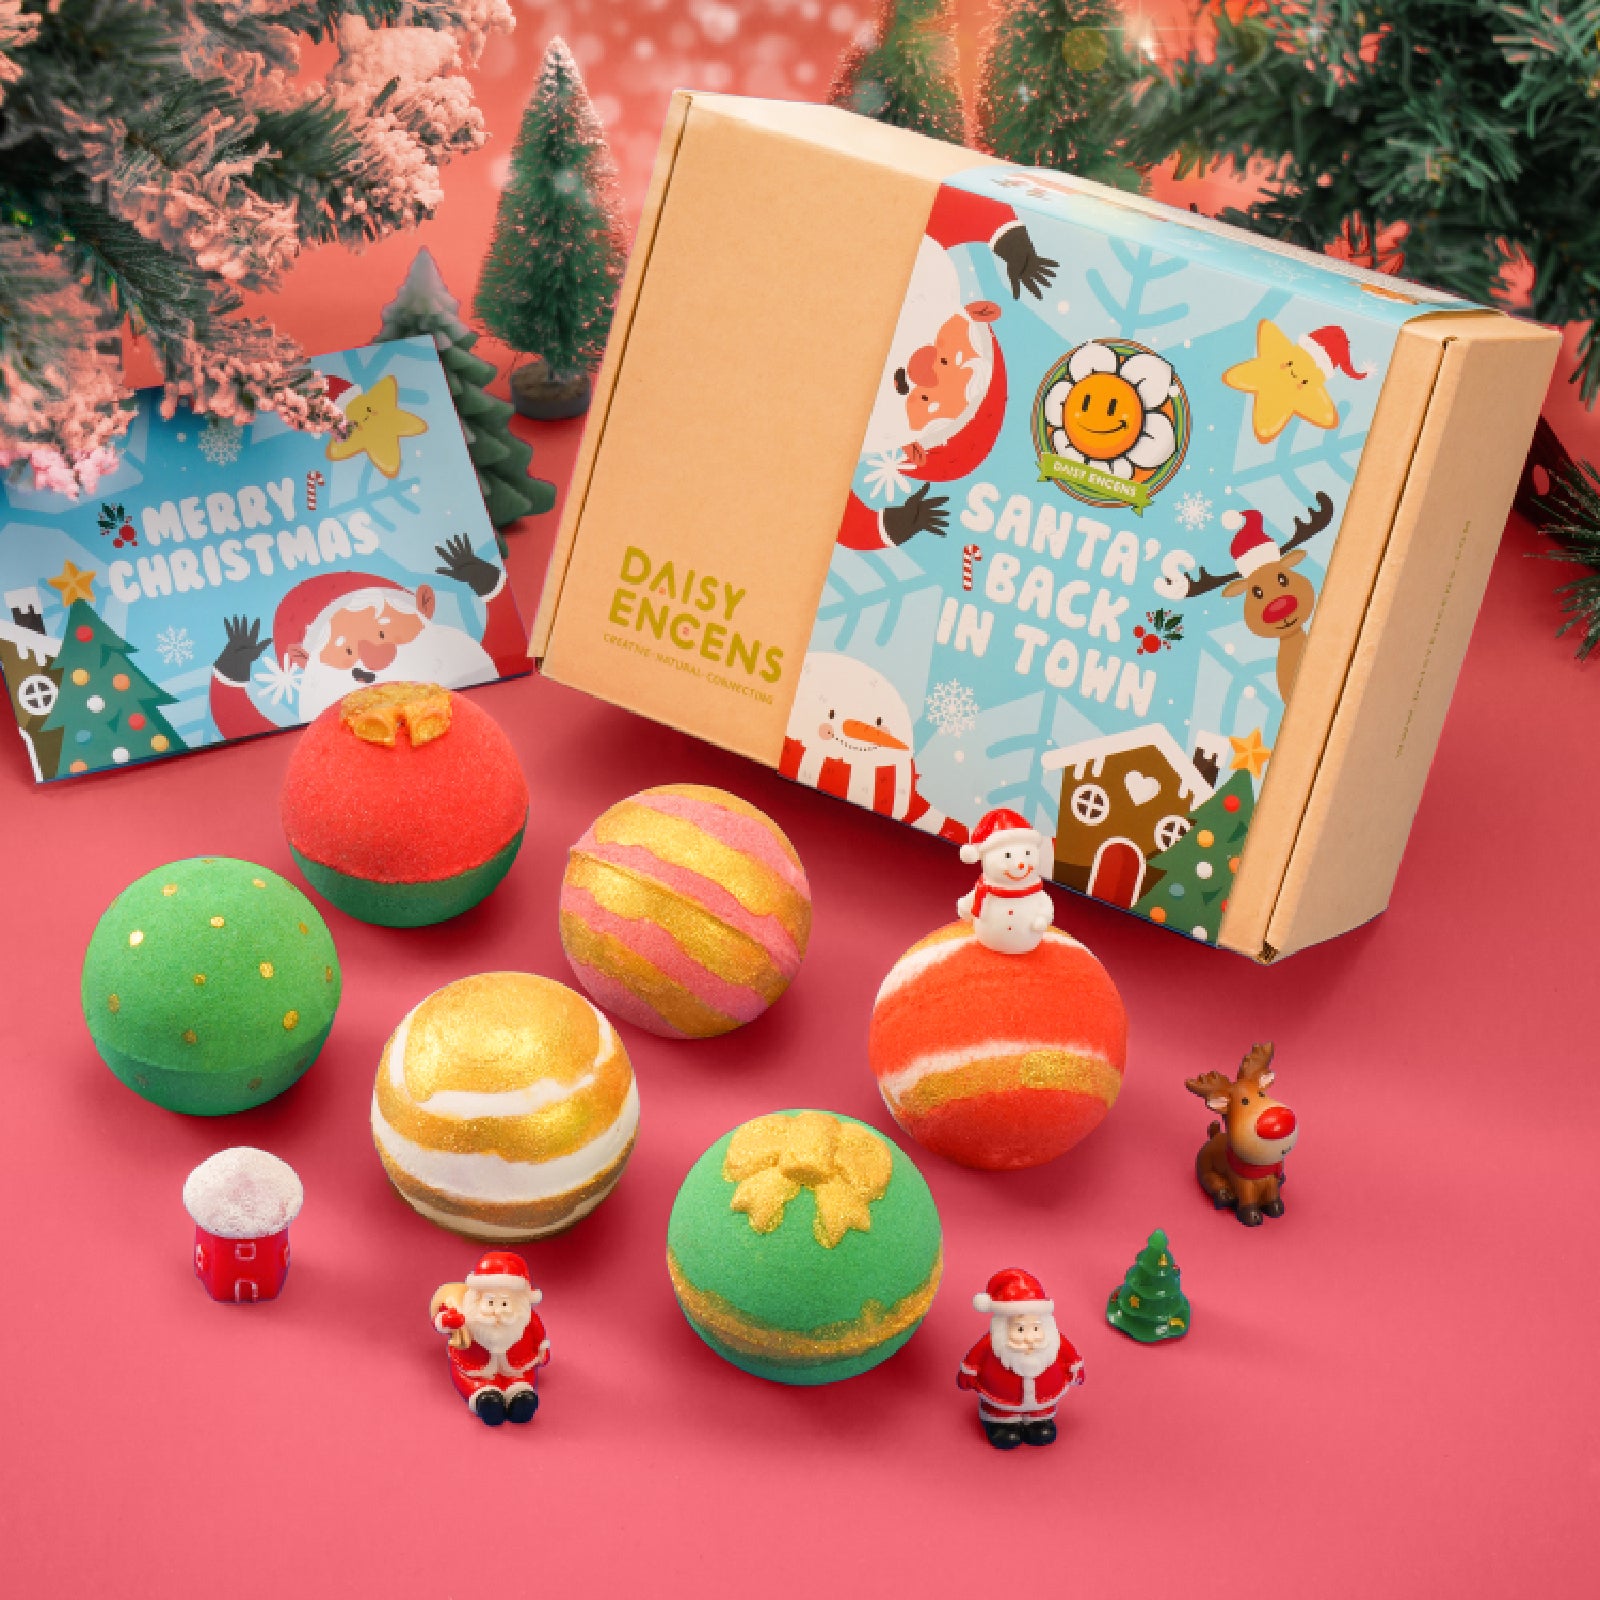 Santa's Back In Town Bath Bomb Gift Set with Christmas Card